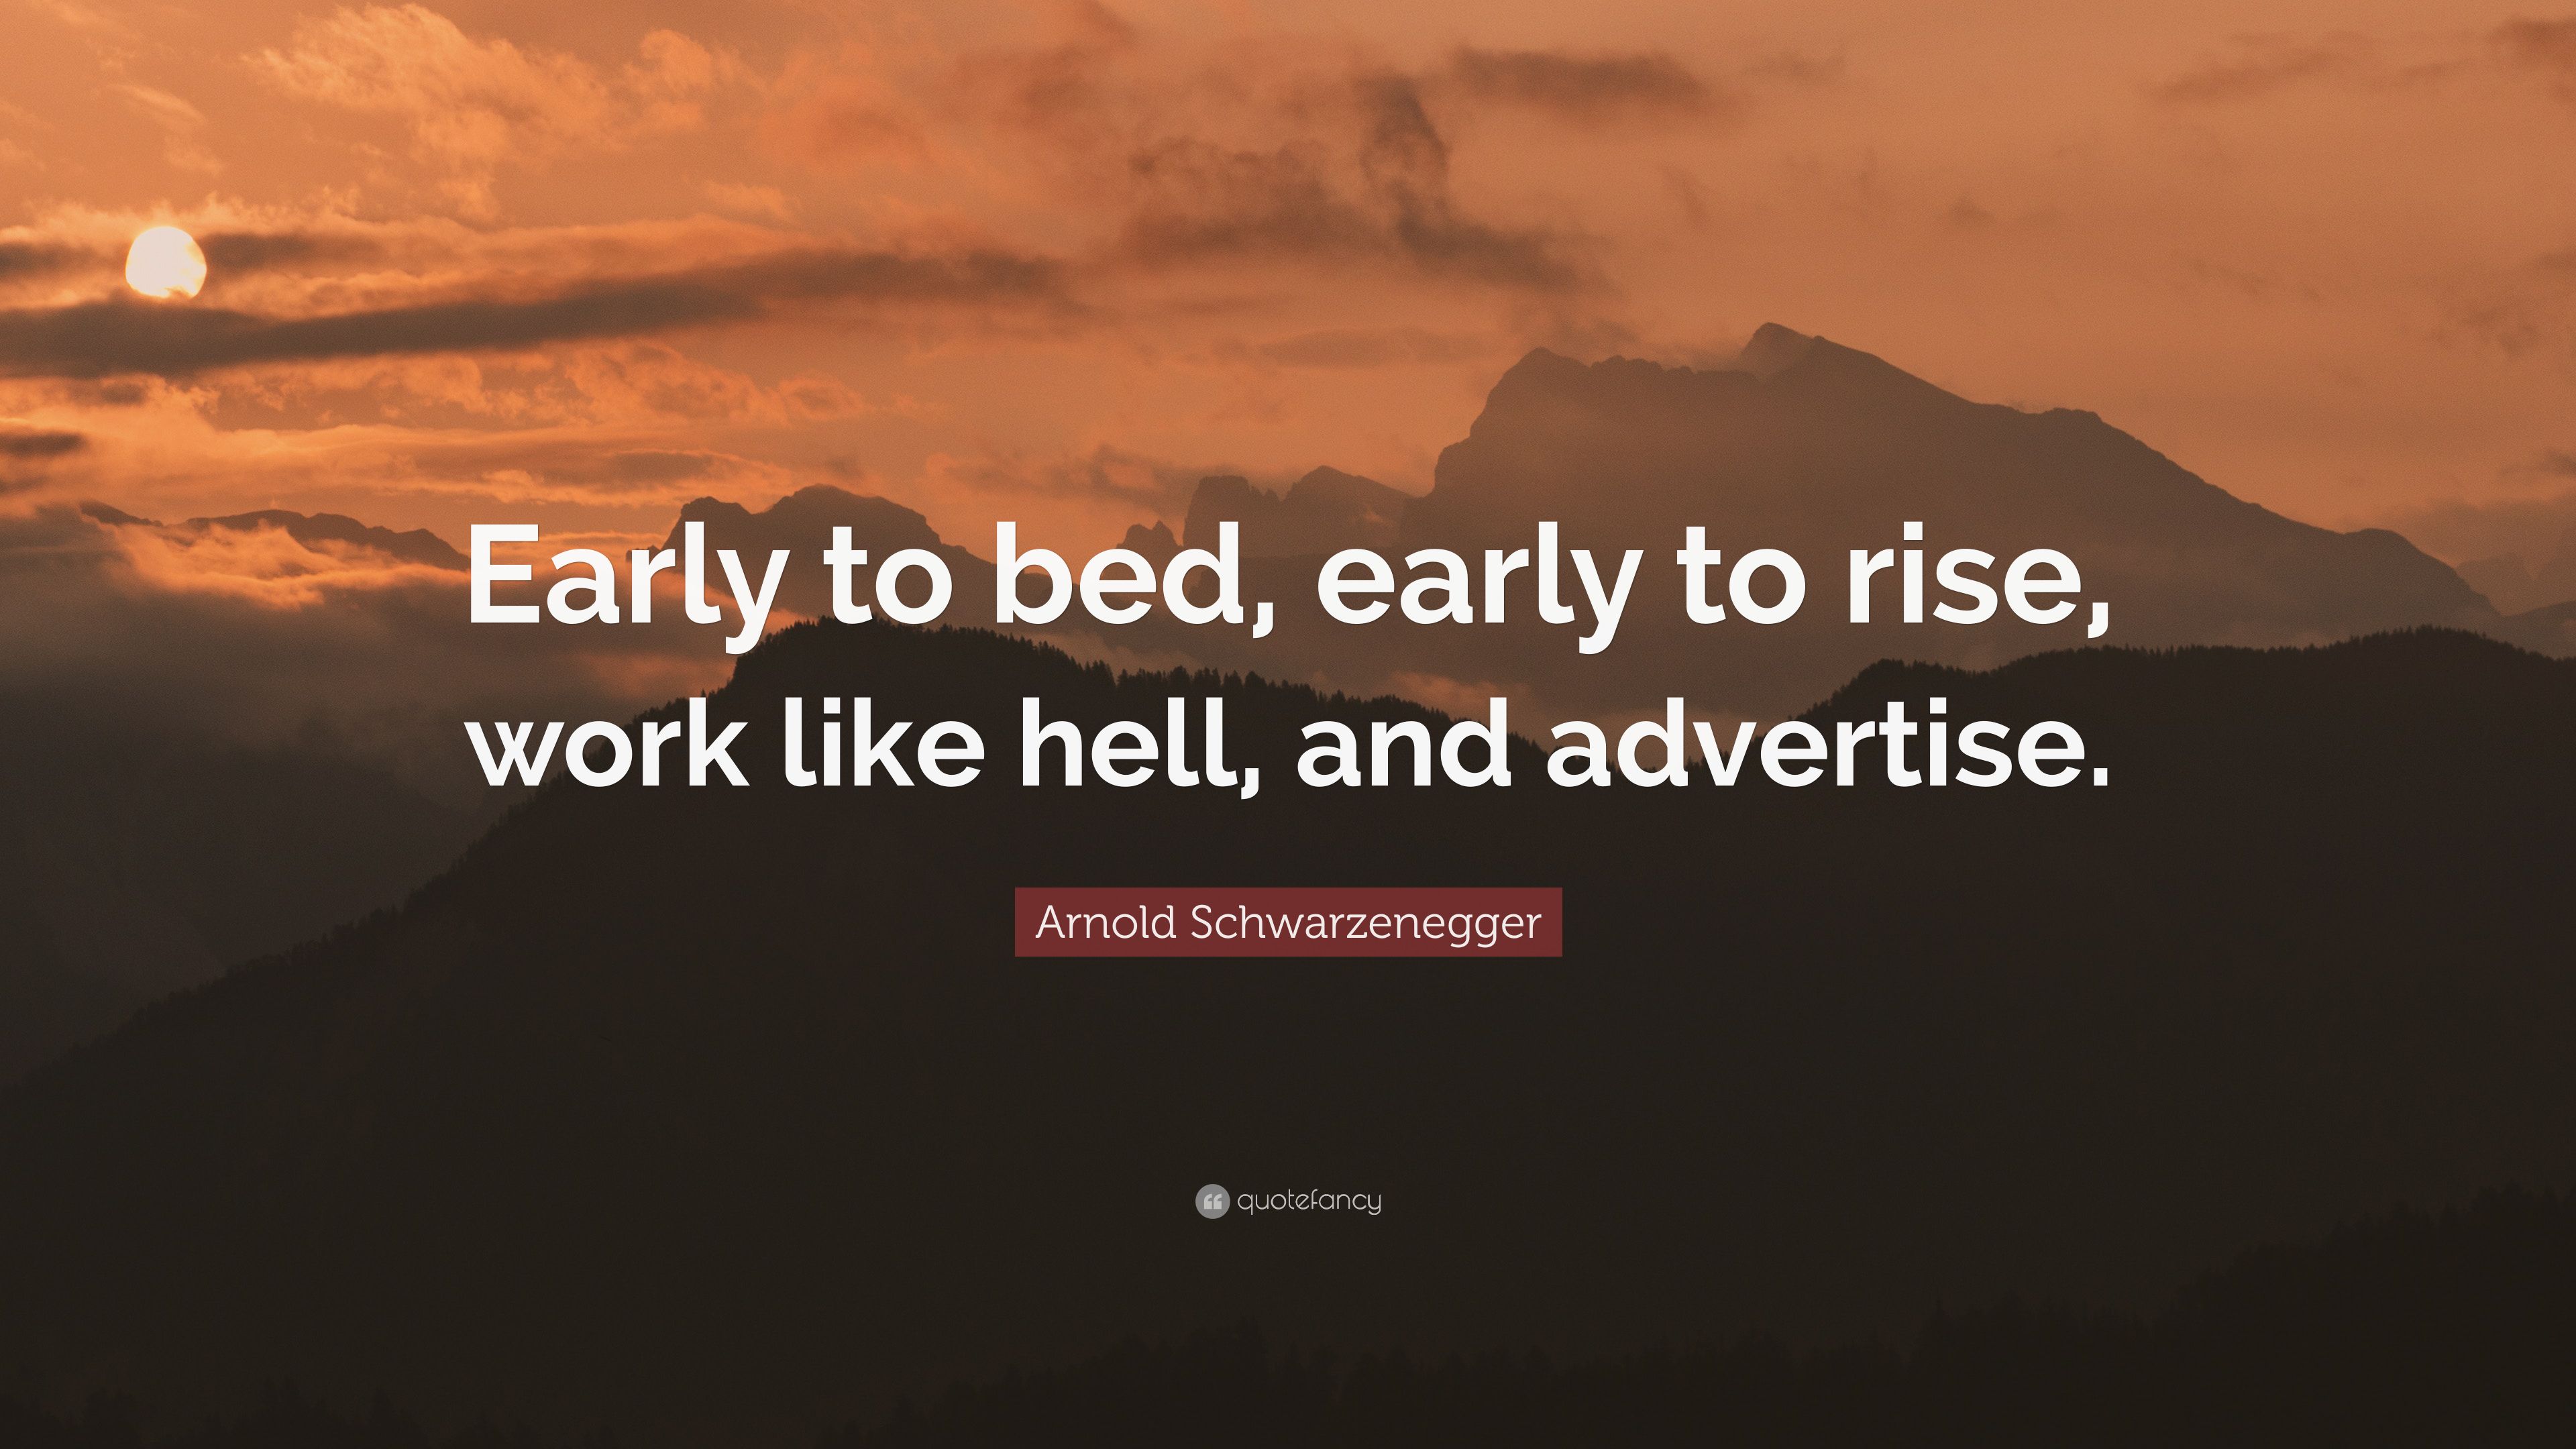 Arnold Schwarzenegger Quote: “Early to bed, early to rise, work like hell, and advertise.” (2 wallpaper)